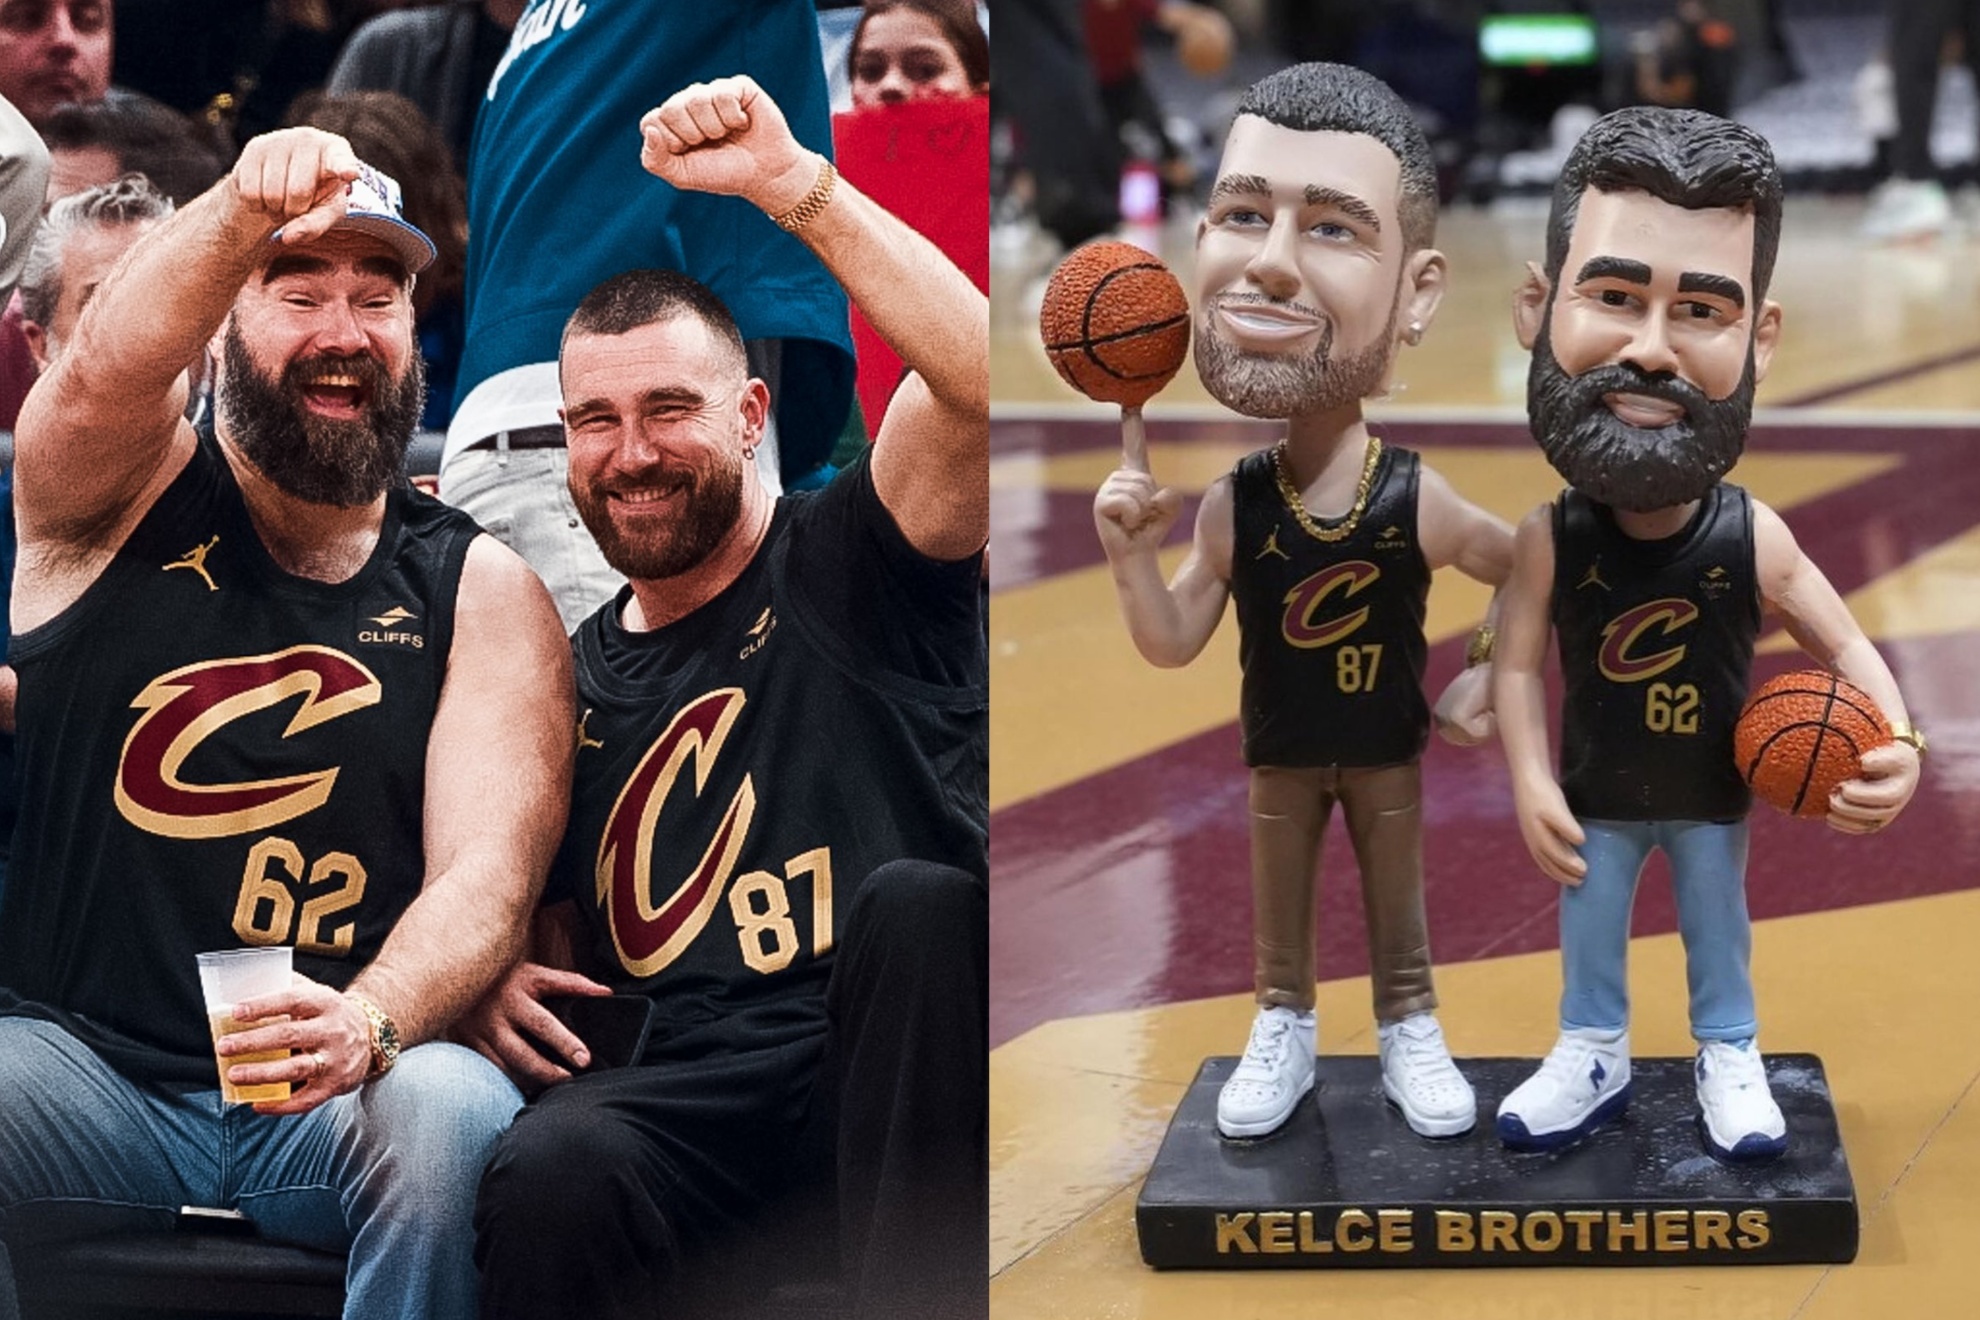 The Cleaveland Cavaliers gave away Kelce brothers bobble heads on Tuesday night